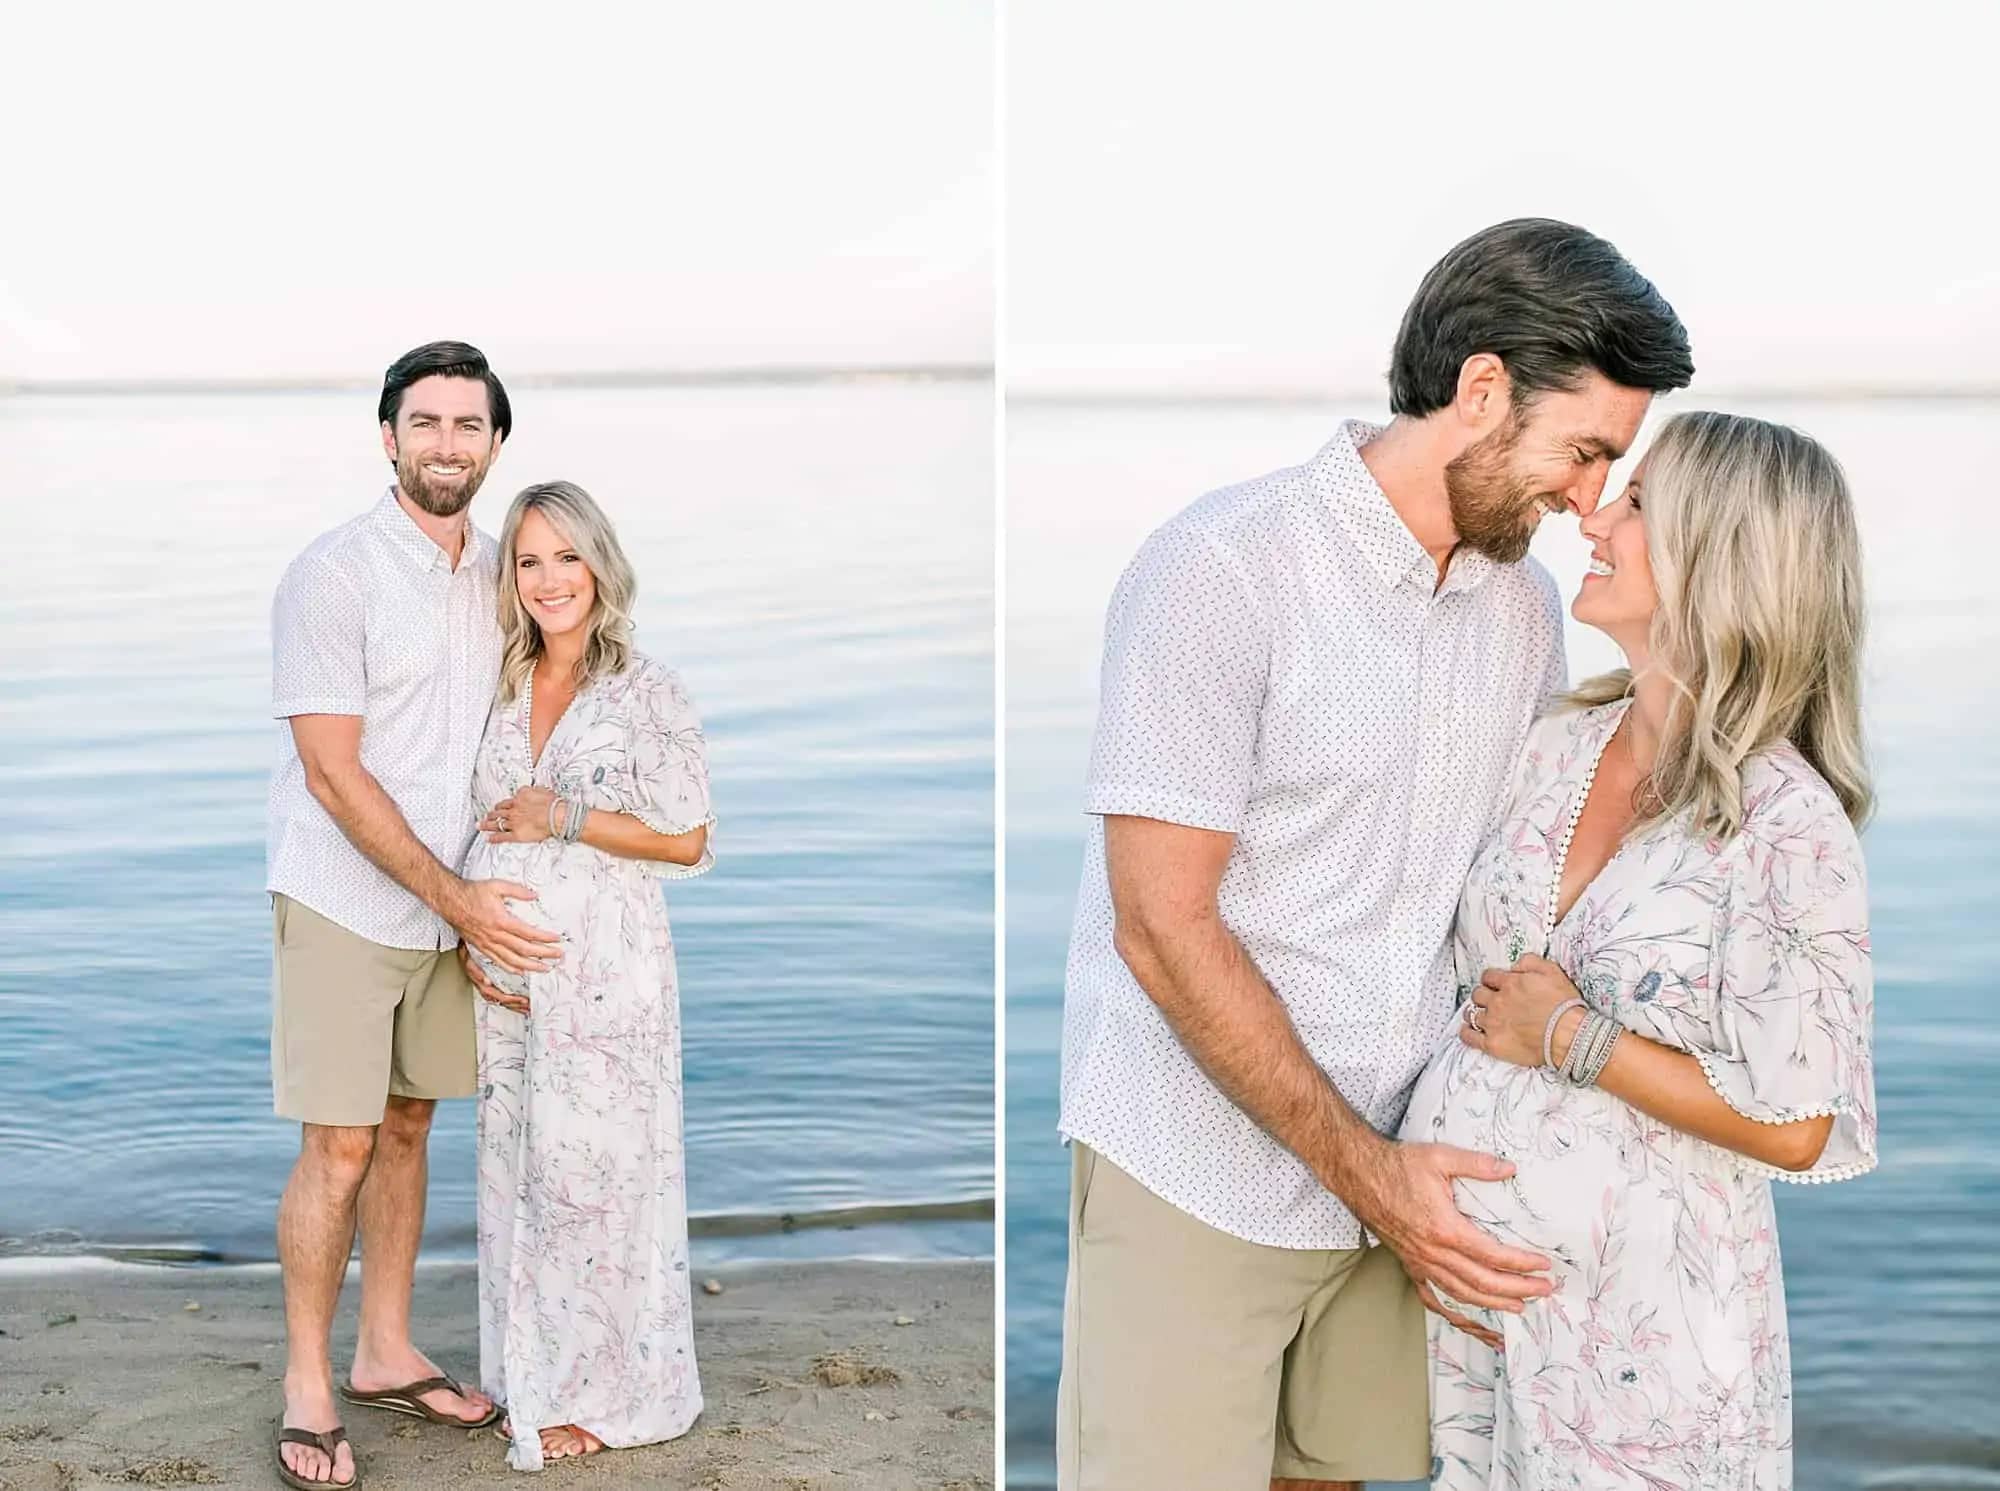 Pregnant couple smiling on the beach